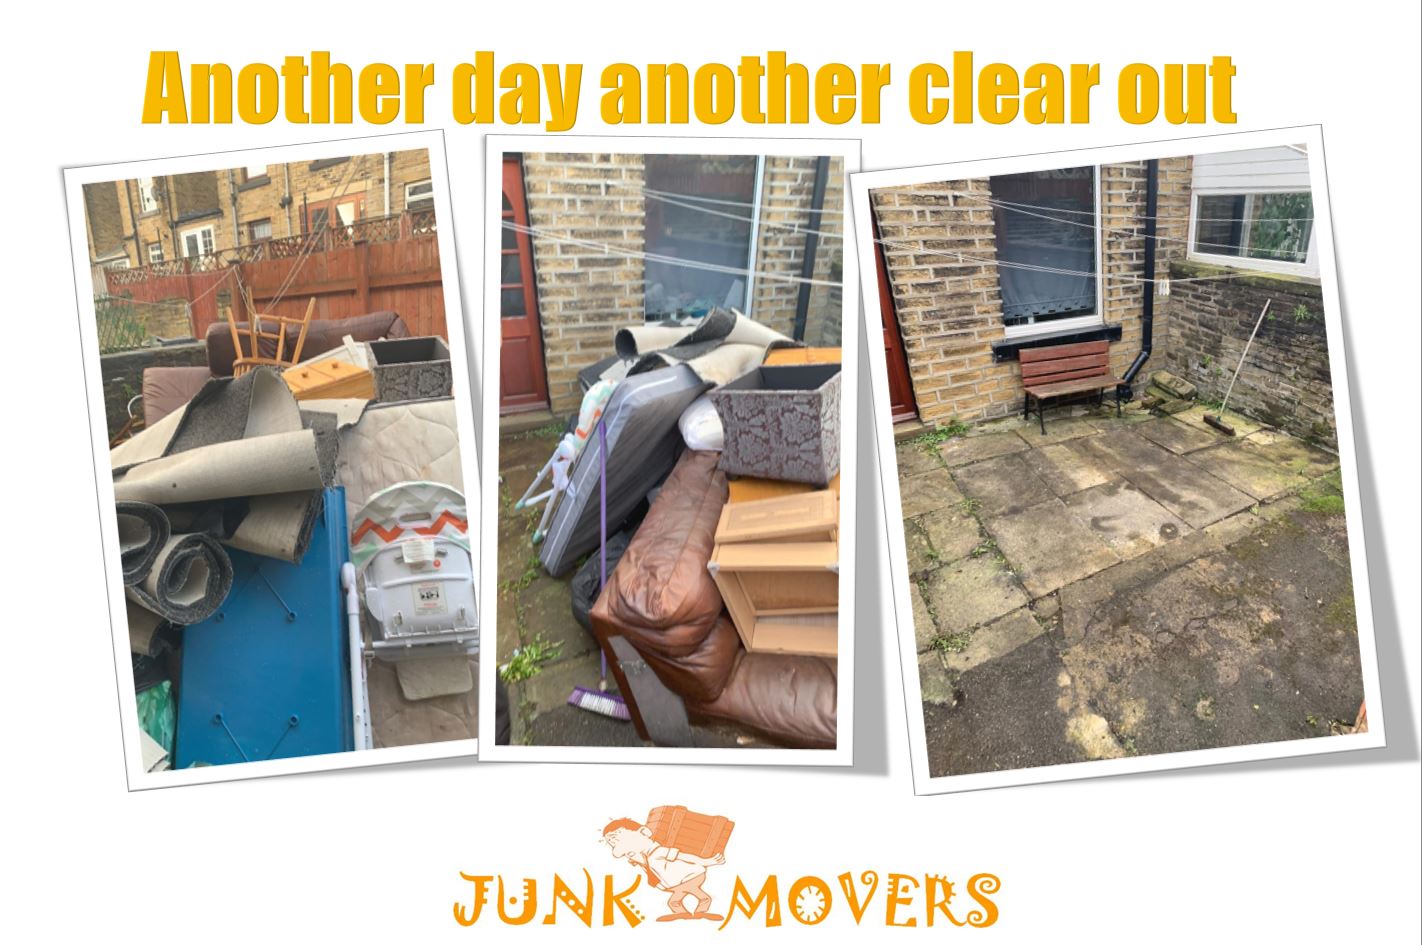 Junk Collections Huddersfield, Junk Movers West Yorkshire Ltd